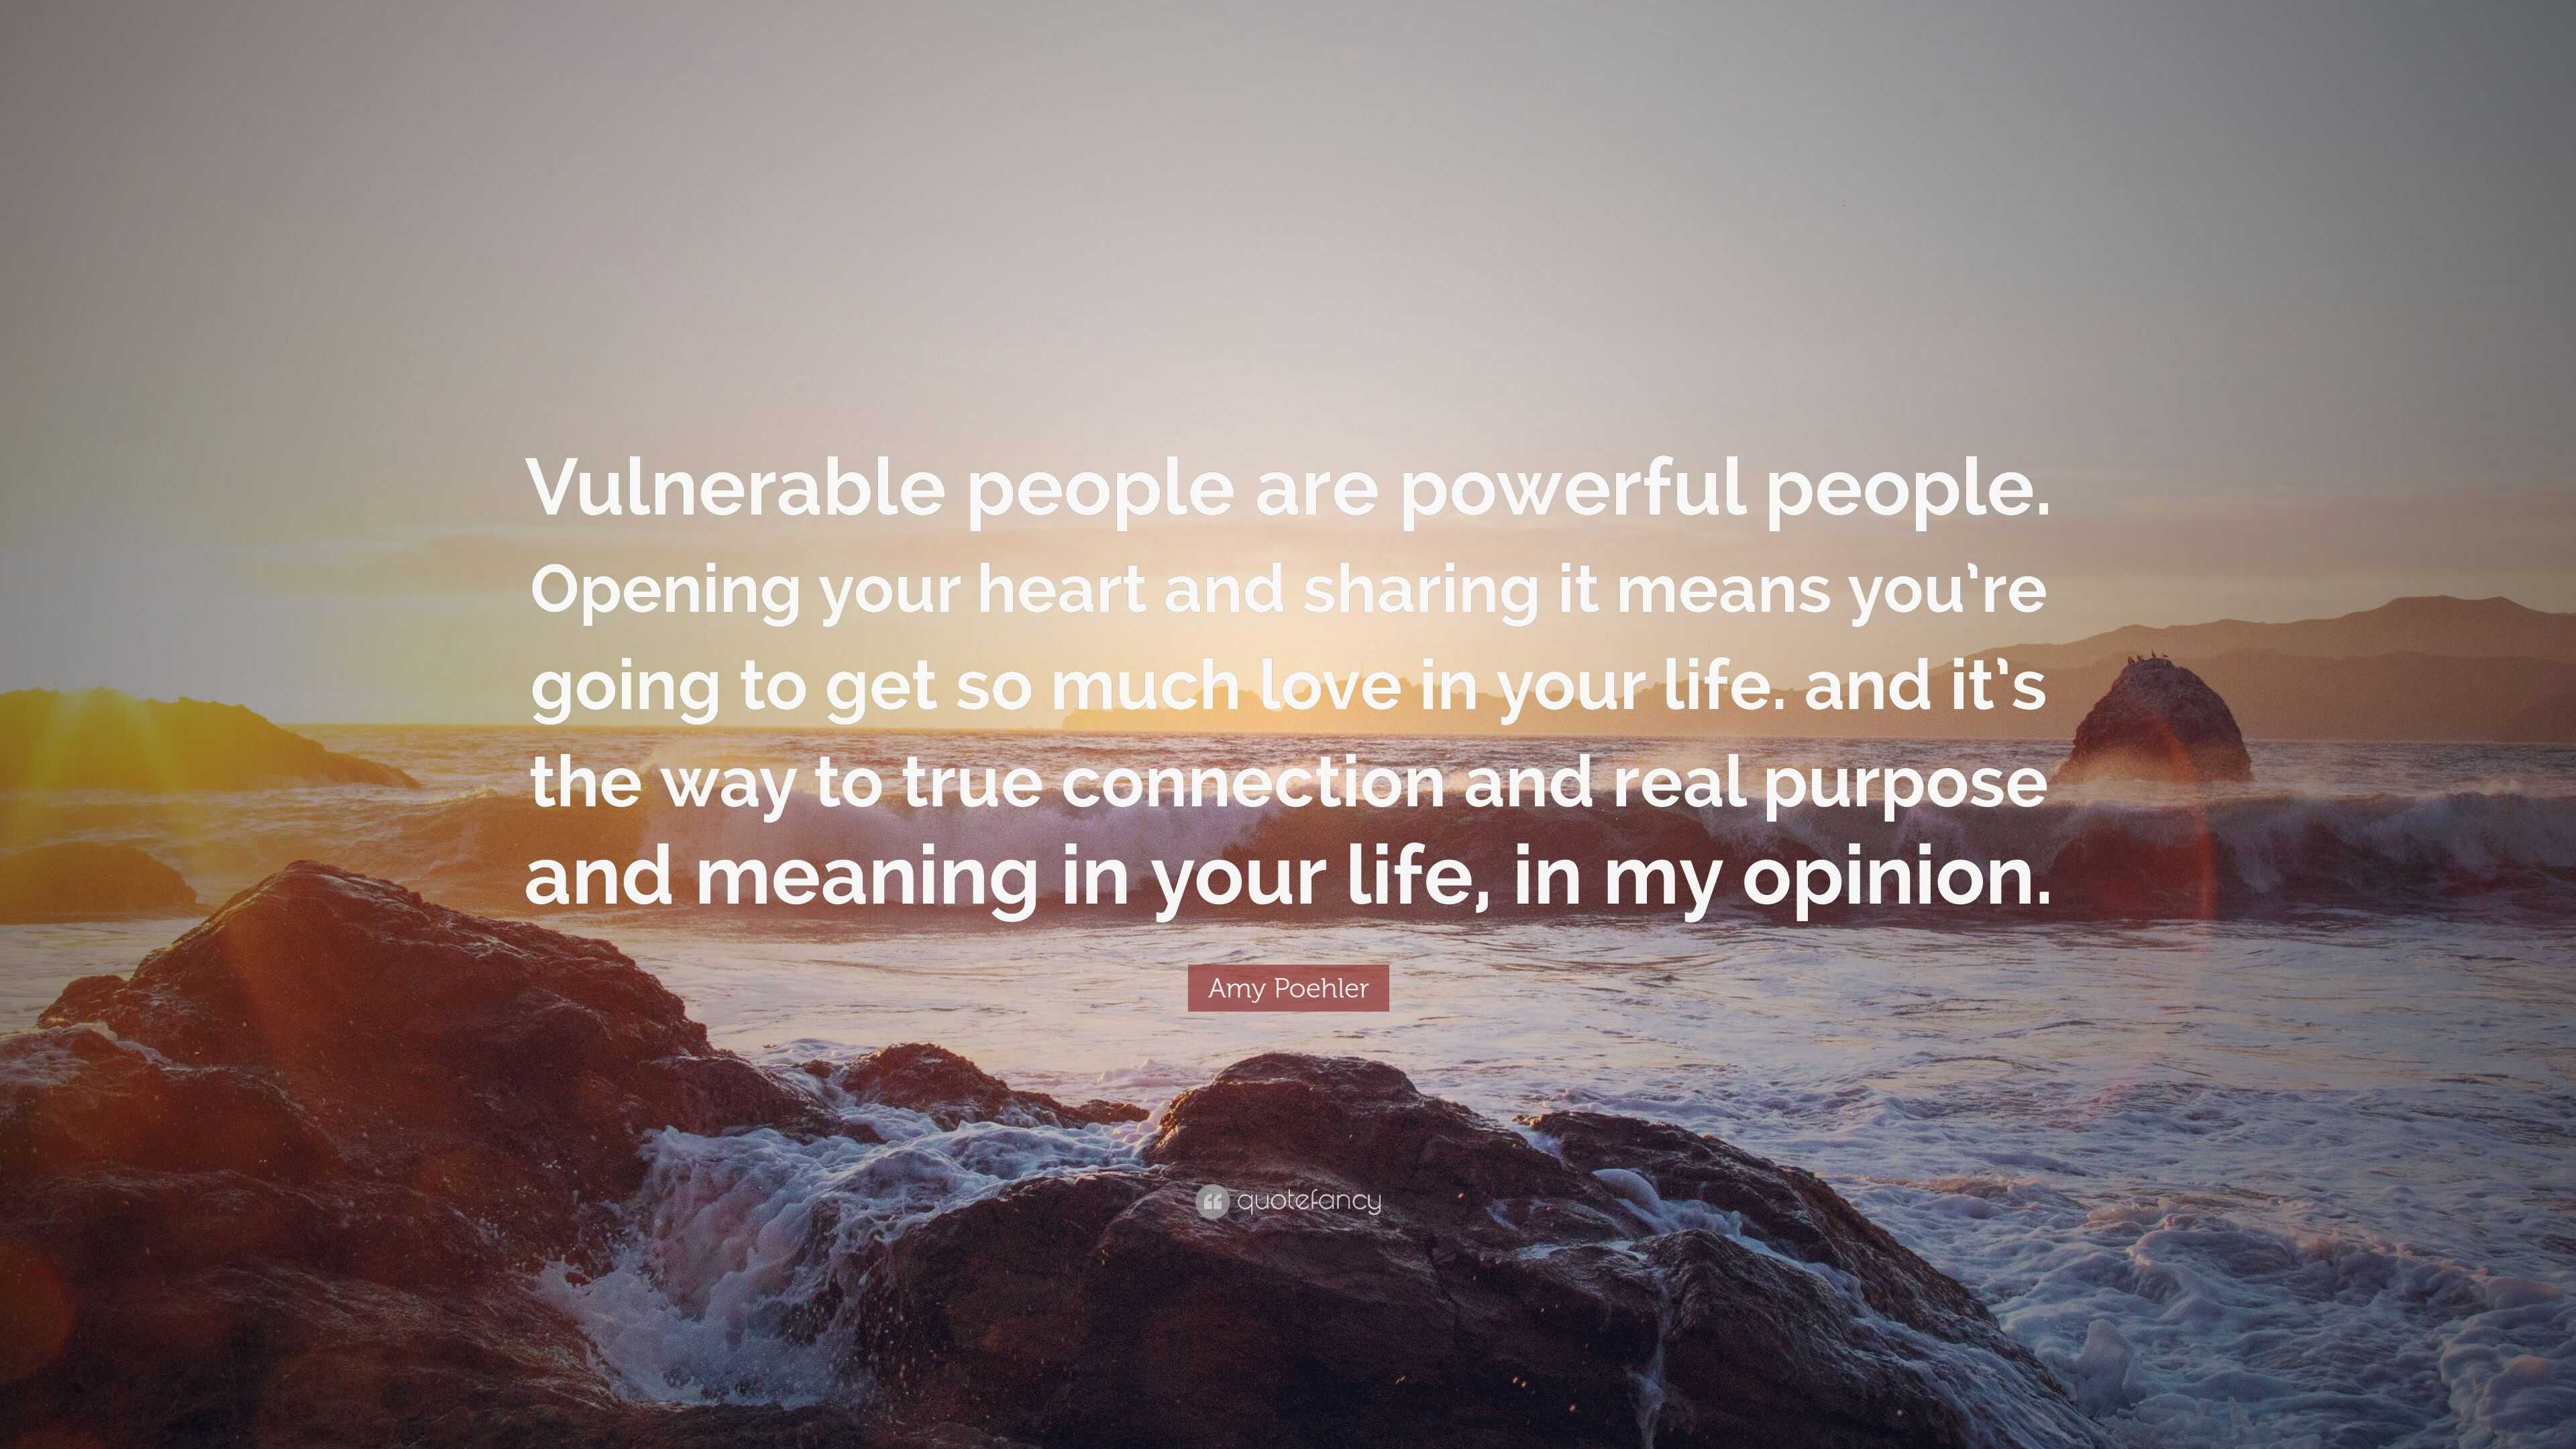 Amy Poehler Quote “Vulnerable people are powerful people Opening your heart and sharing